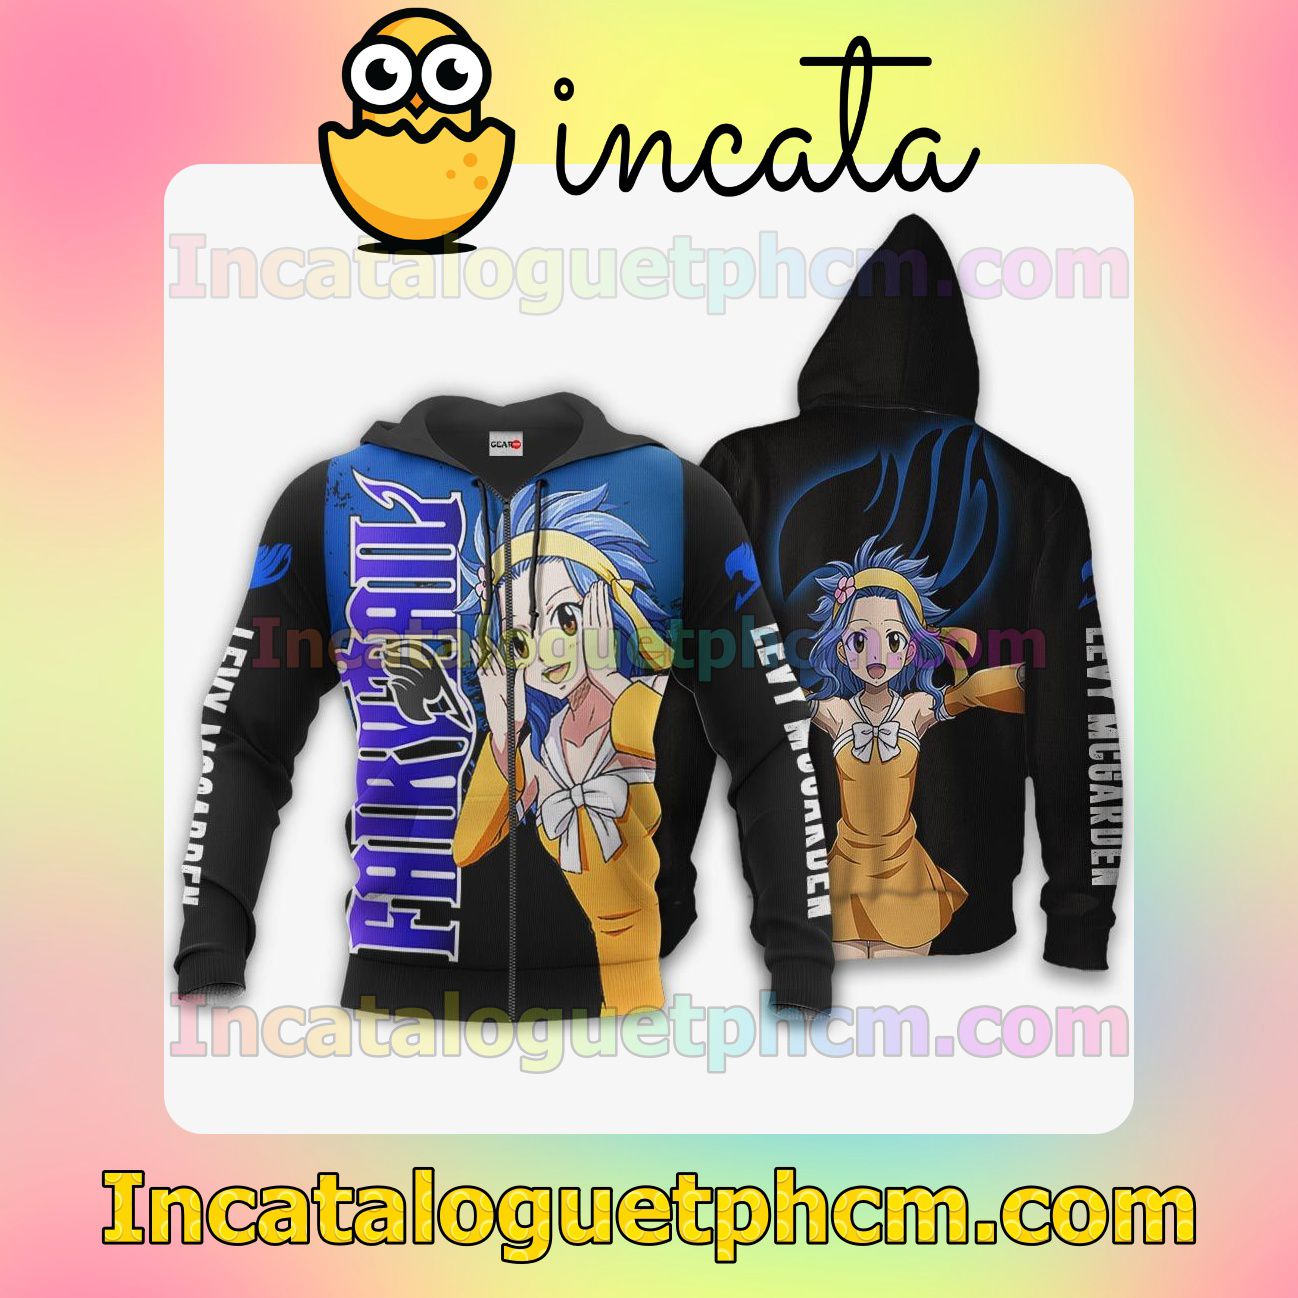 Levy McGarden Fairy Tail Anime Merch Stores Clothing Merch Zip Hoodie Jacket Shirts